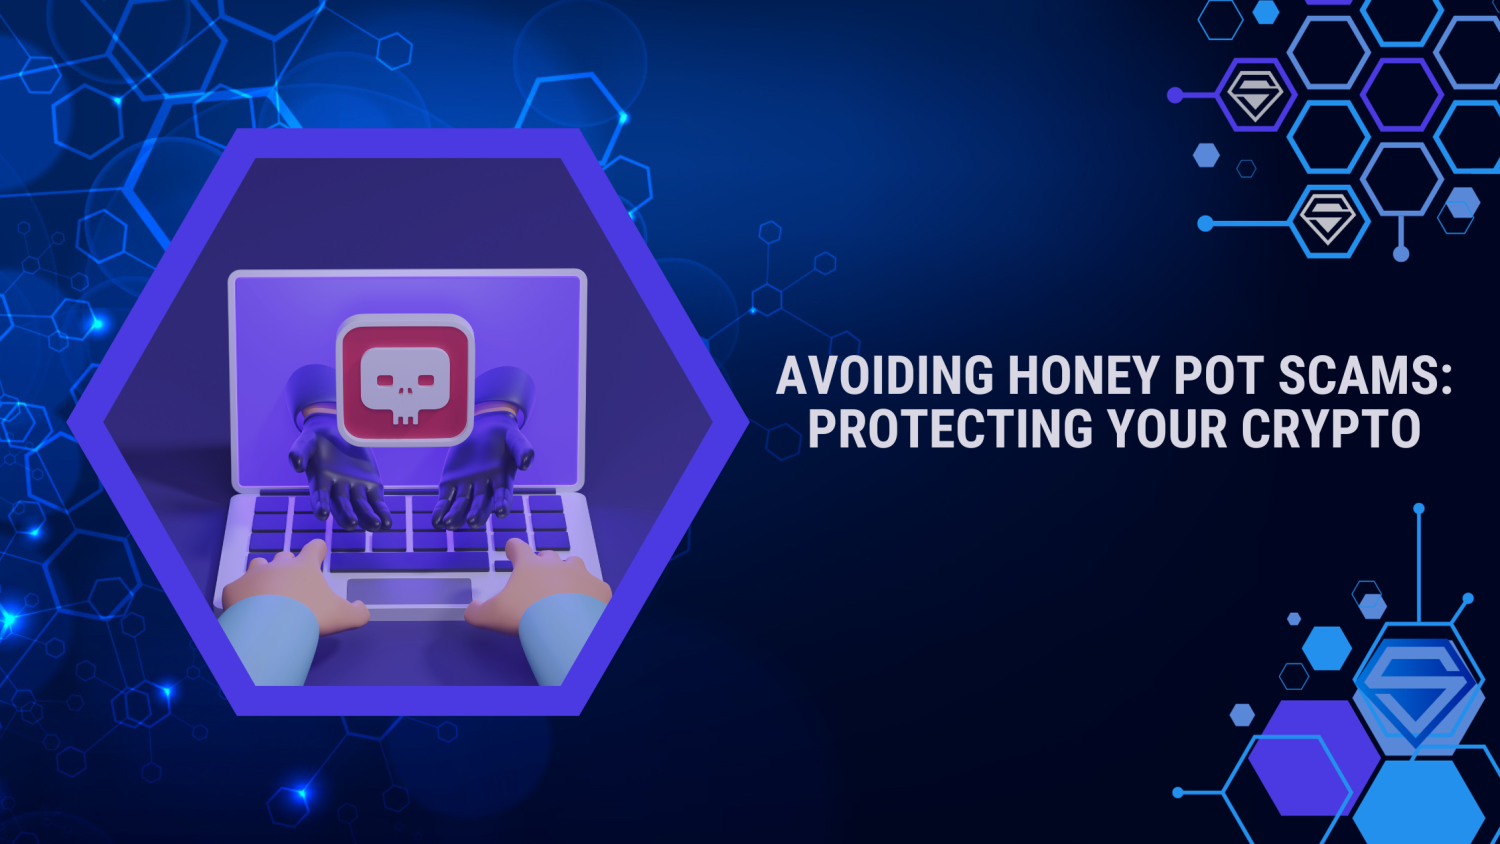 How to Avoid Honey Pot Scams and Protect Your Crypto